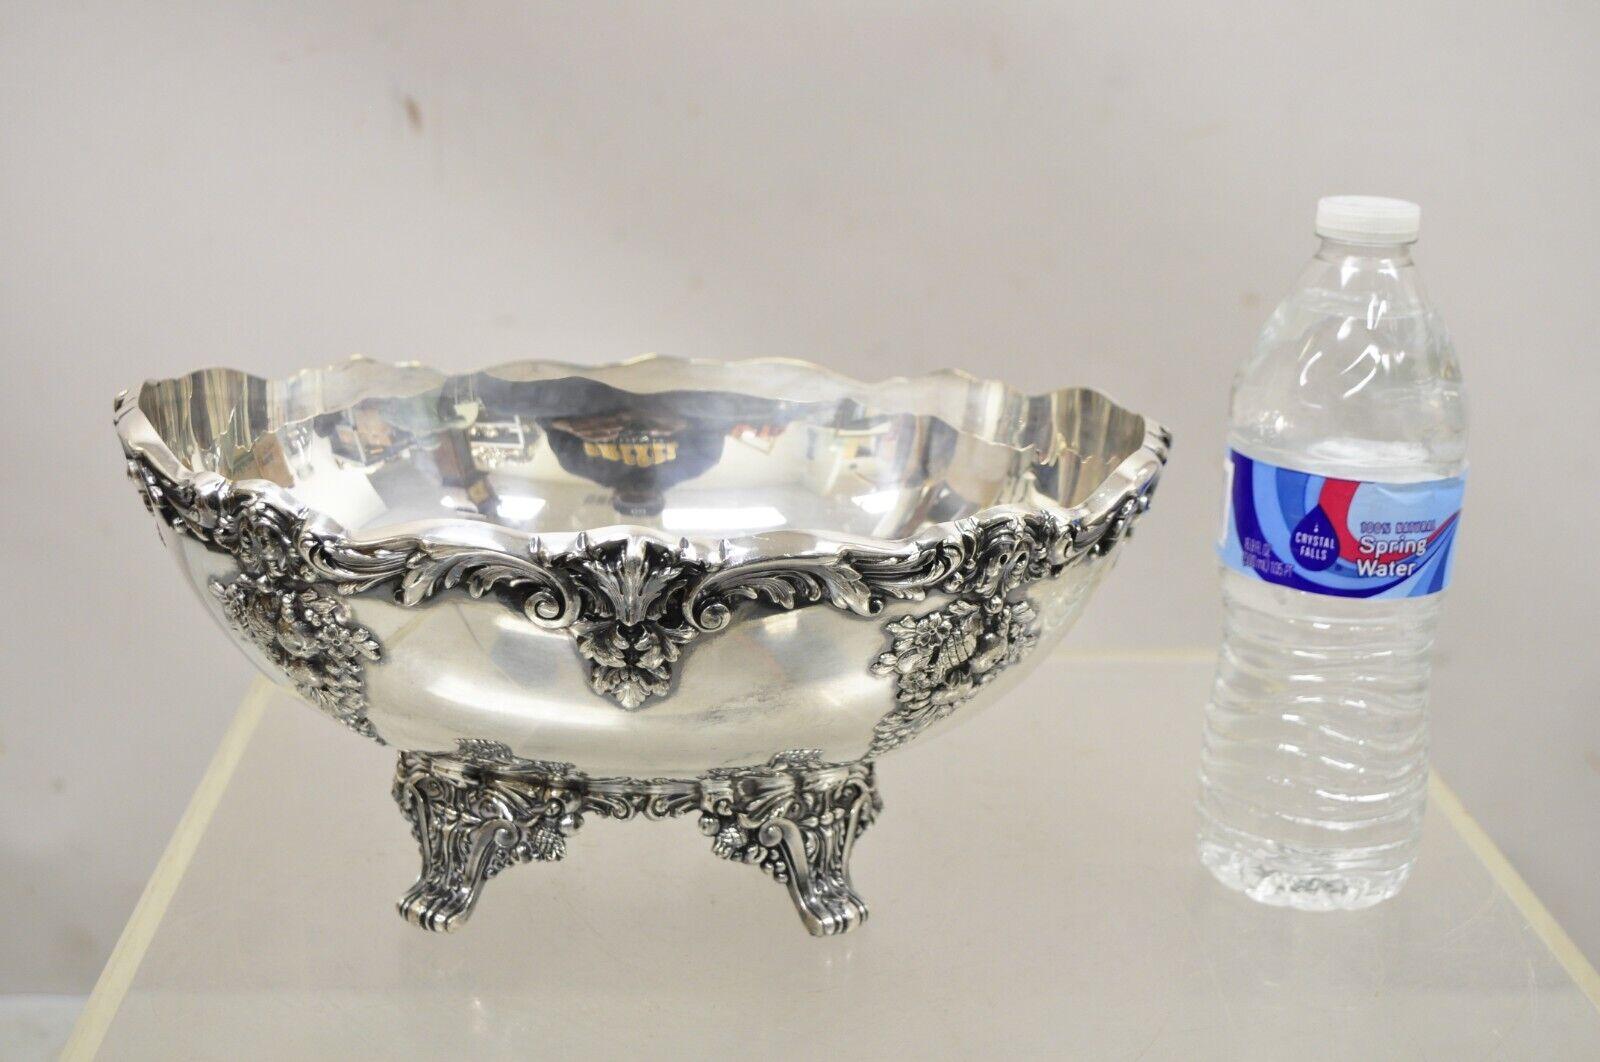 Reed & Barton King Francis 1684 Victorian Style Silver Plated Oval Footed Fruit Serving Bowl. Iem featured is raised on ornate feet, ornate leafy scrollwork, nice oval form, original hallmark, very nice vintage item, great style and form. Circa Mid